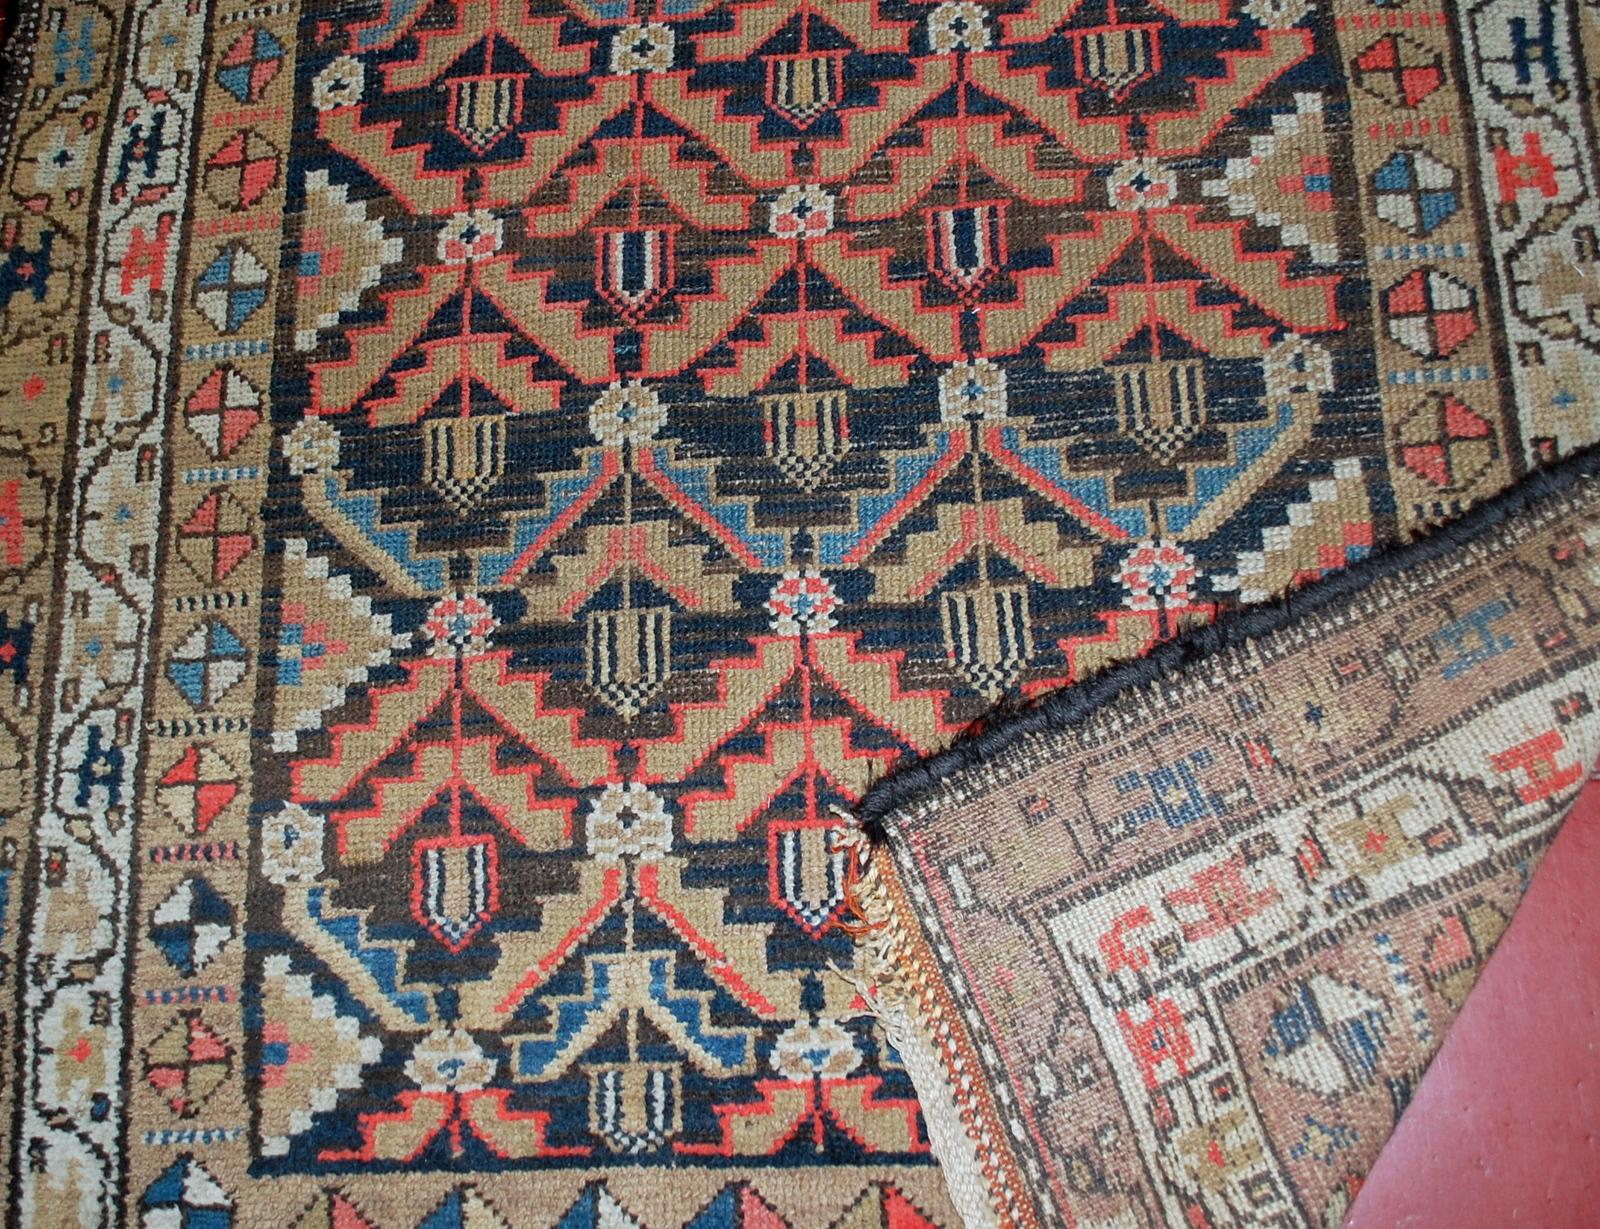 Antique Persian Hamadan rug in original condition, it has some low pile. The rug is from the Middle East region made in the beginning of 20th century.

-Condition: original good, some low pile.

-Circa 1920s,

-Size: 4.1' x 7' ( 125cm x 213cm